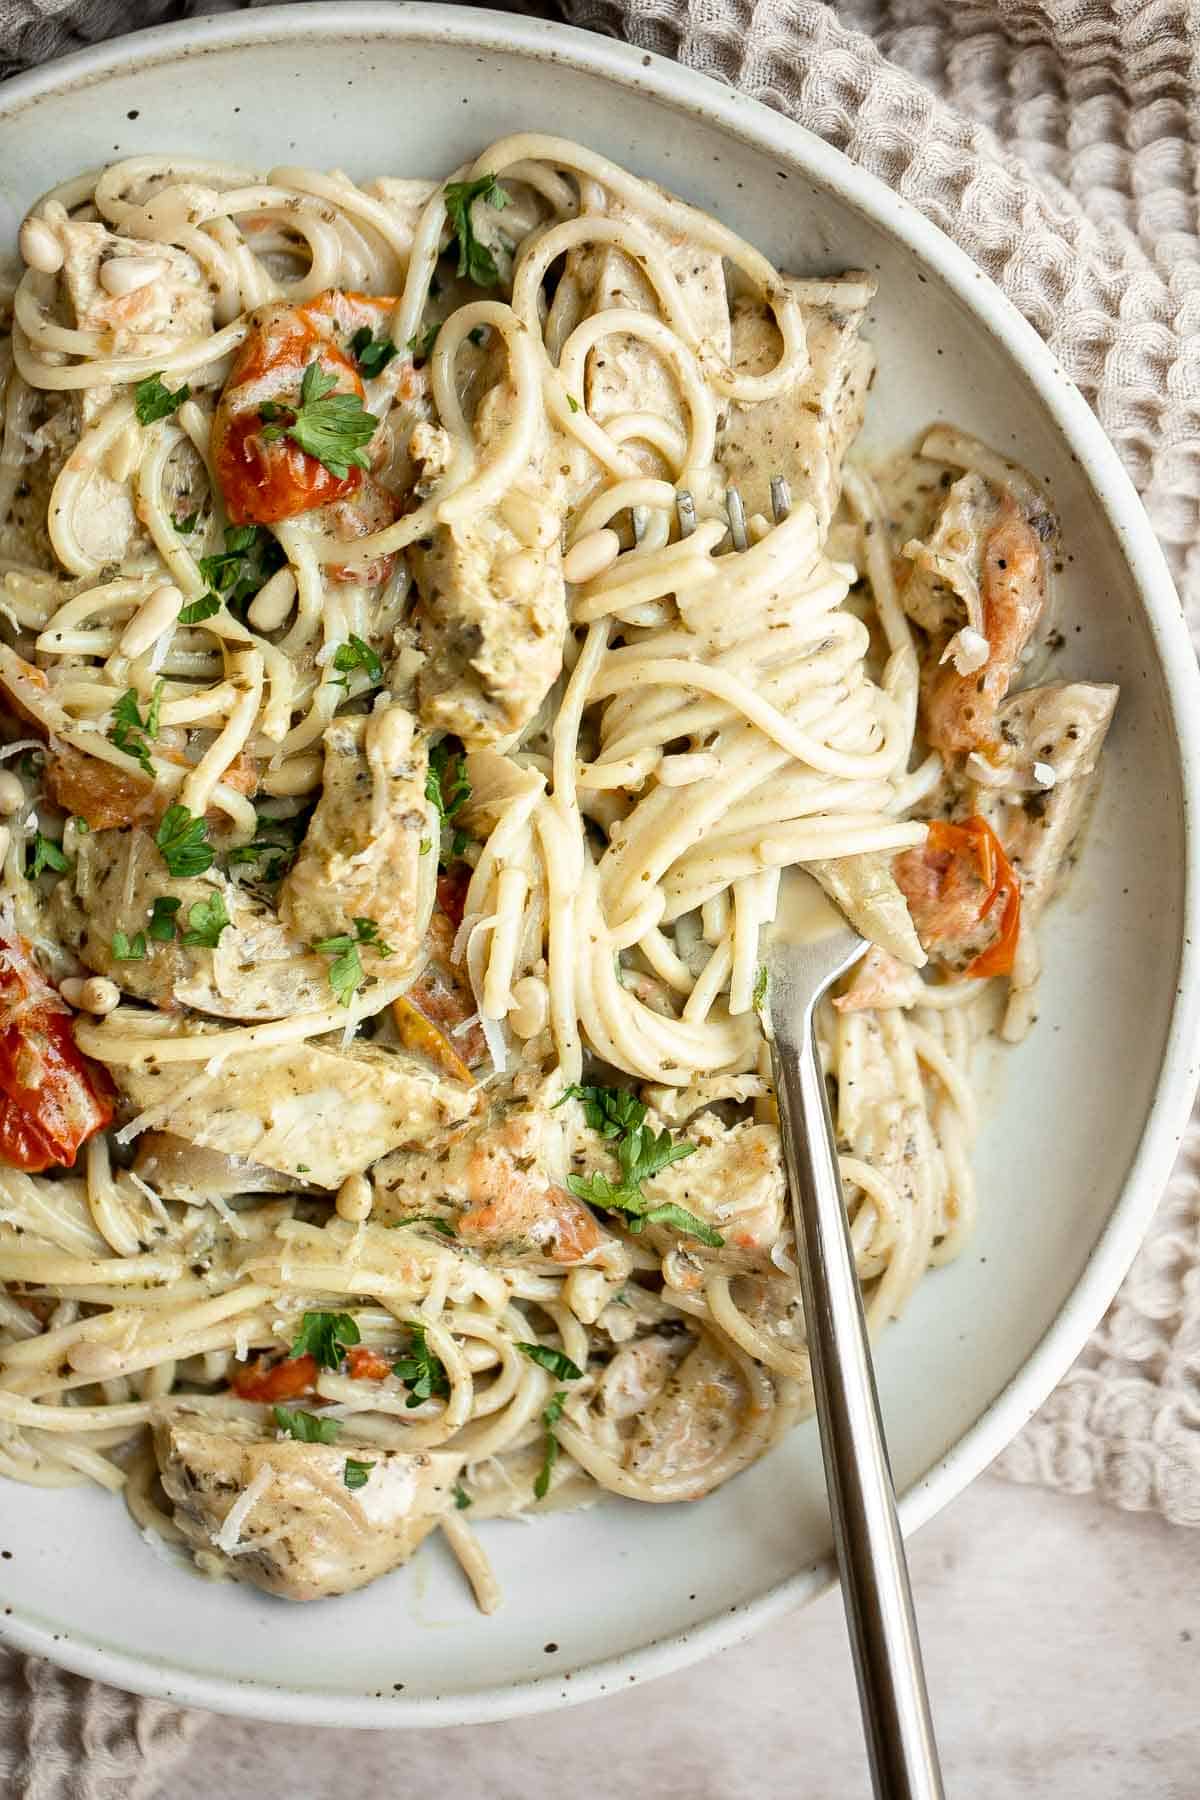 Creamy Chicken Pesto Pasta is a delicious 30 minute recipe that is packed with flavor, quick and easy to make, and will satisfy the whole family. | aheadofthyme.com